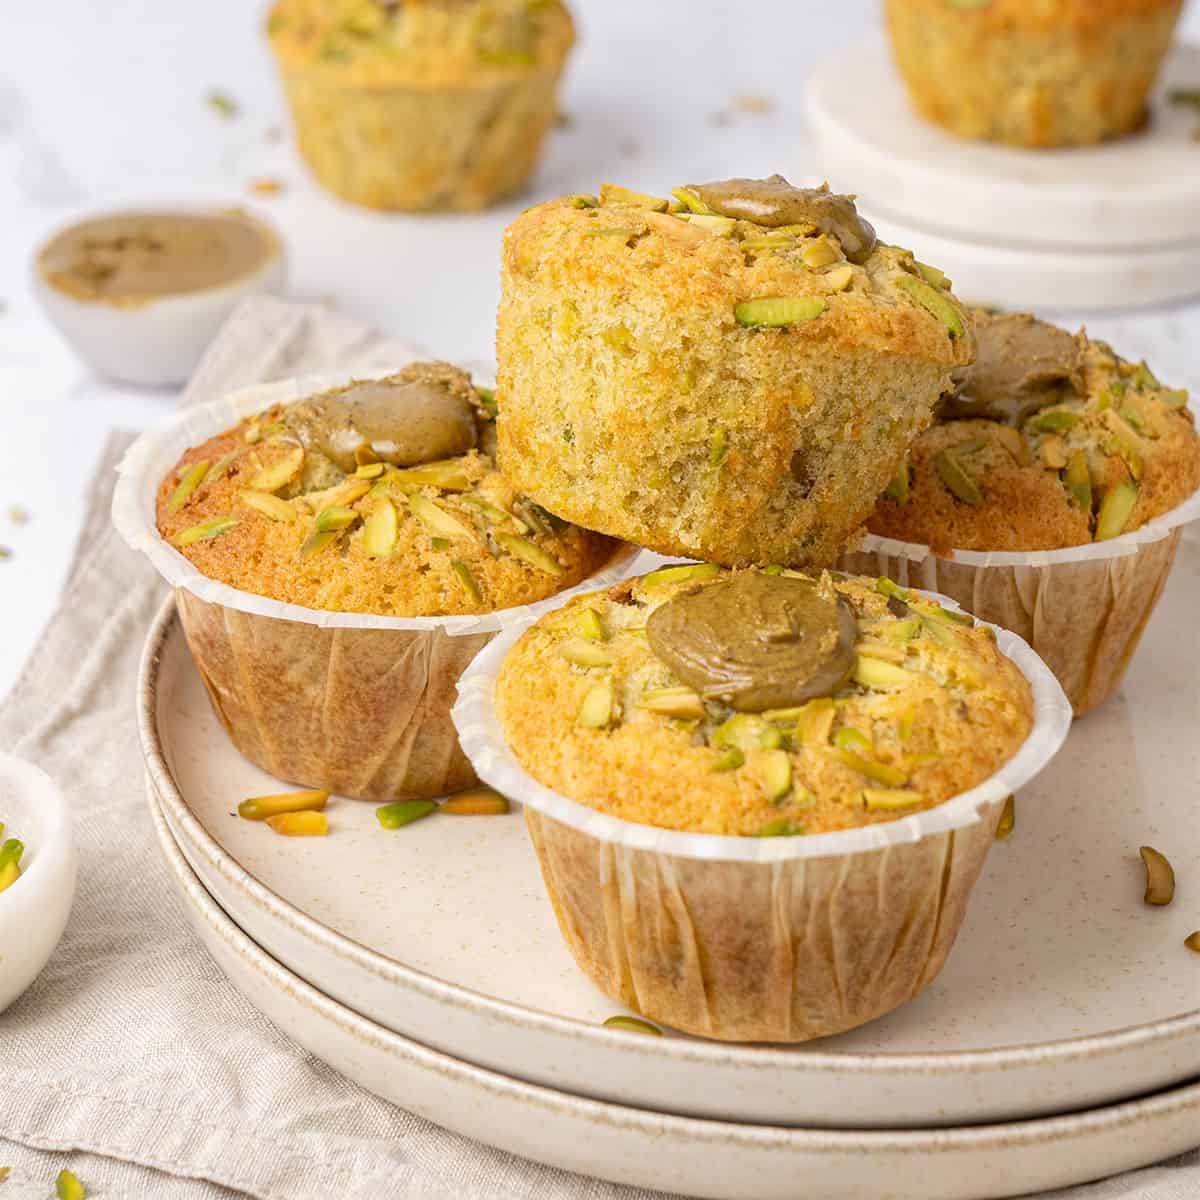 Pistachio muffin on a plate.